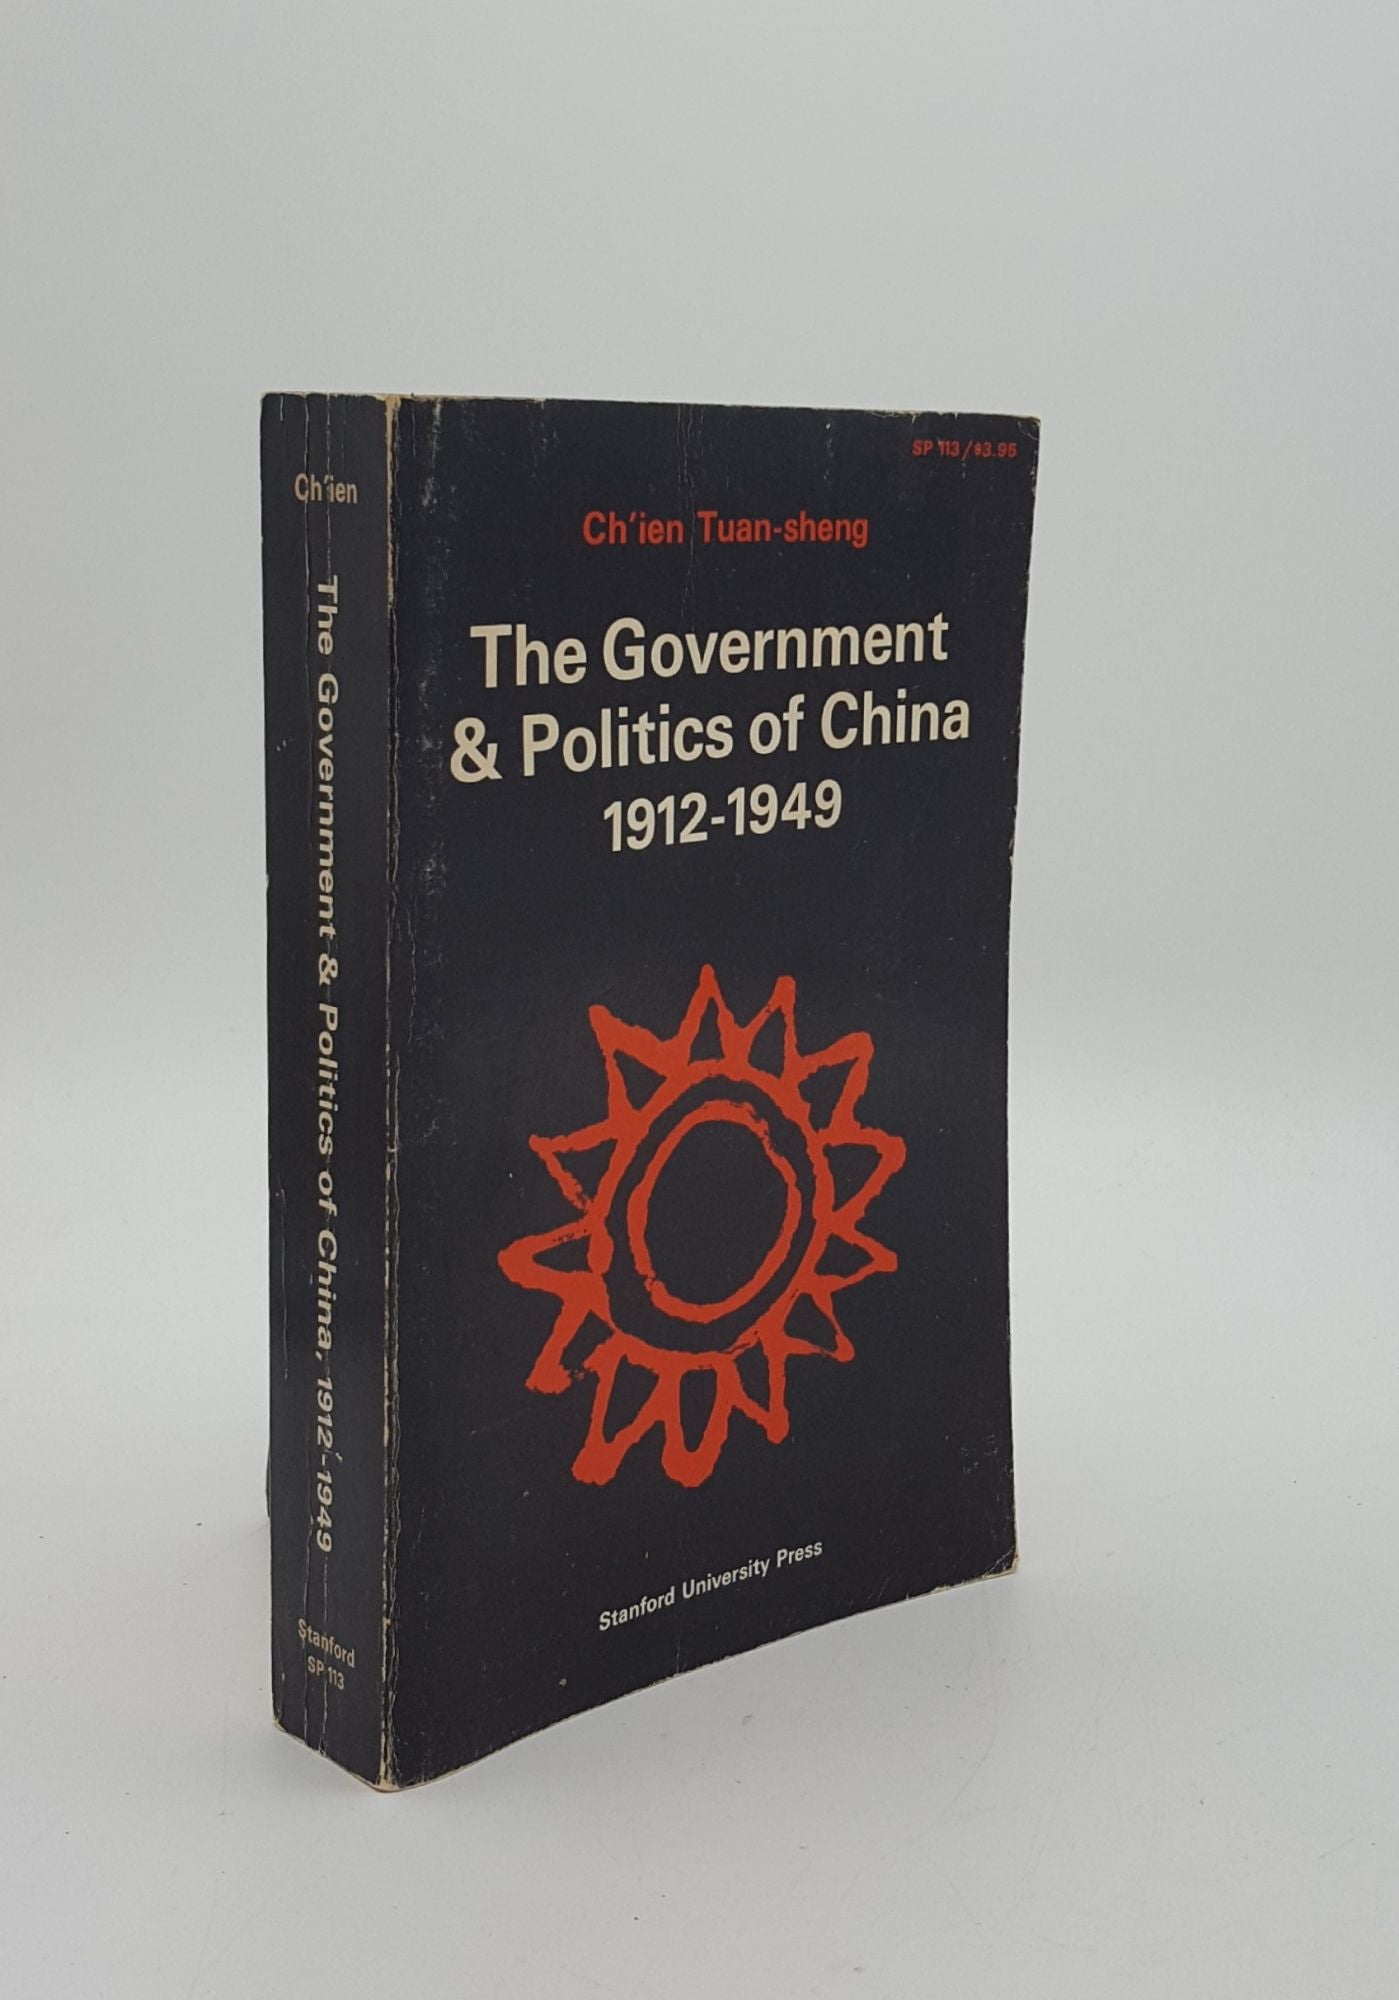 TUAN-SHENG Ch'ien - The Government and Politics of China 1912-1949